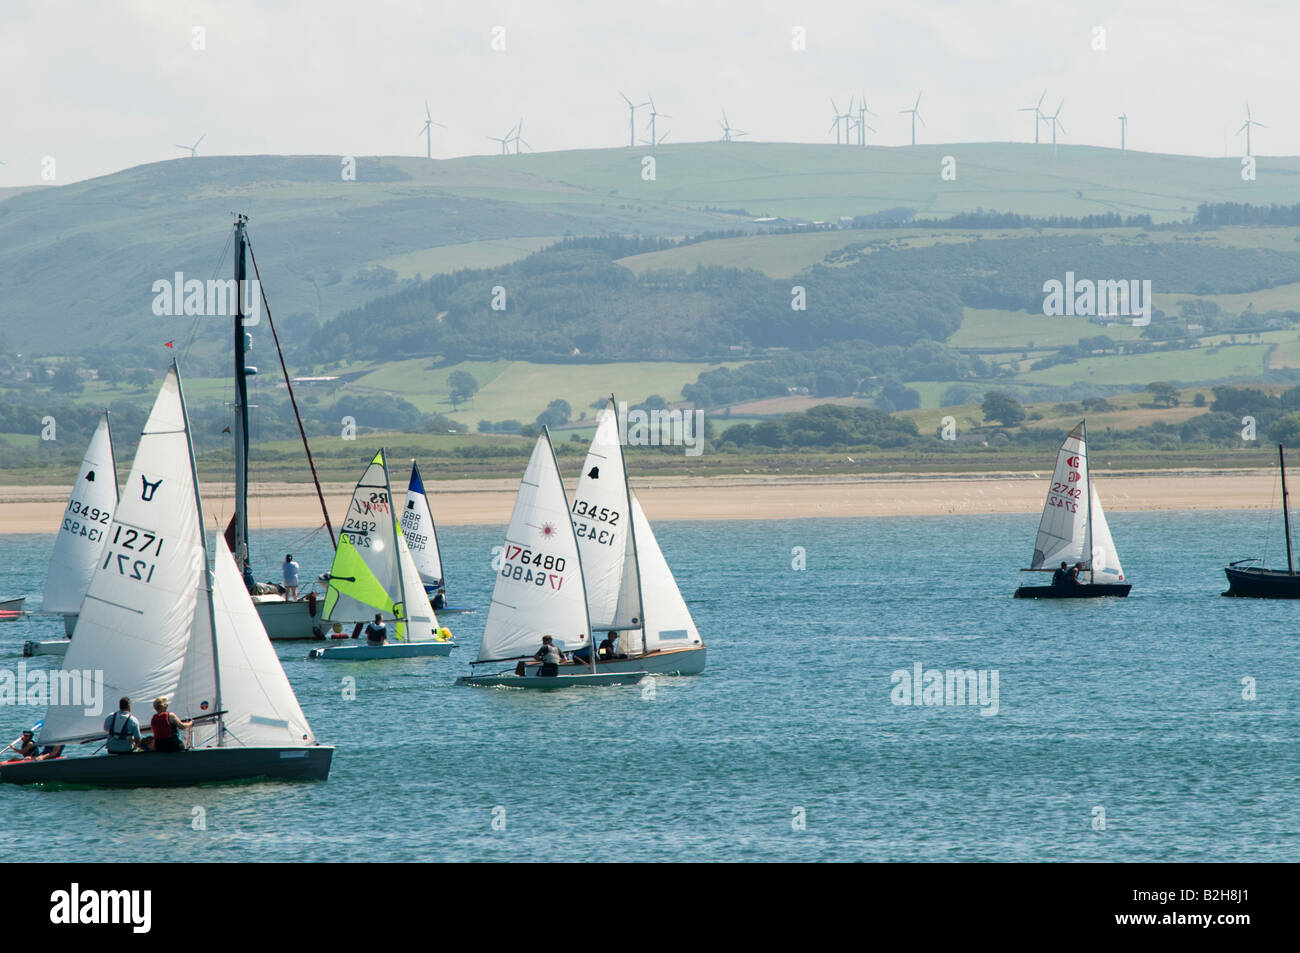 Fleet of sailing dinghy boats on the Dyfi estuary summer afternoon with wind turbines on the hilltop in the distance, Wales UK Stock Photo